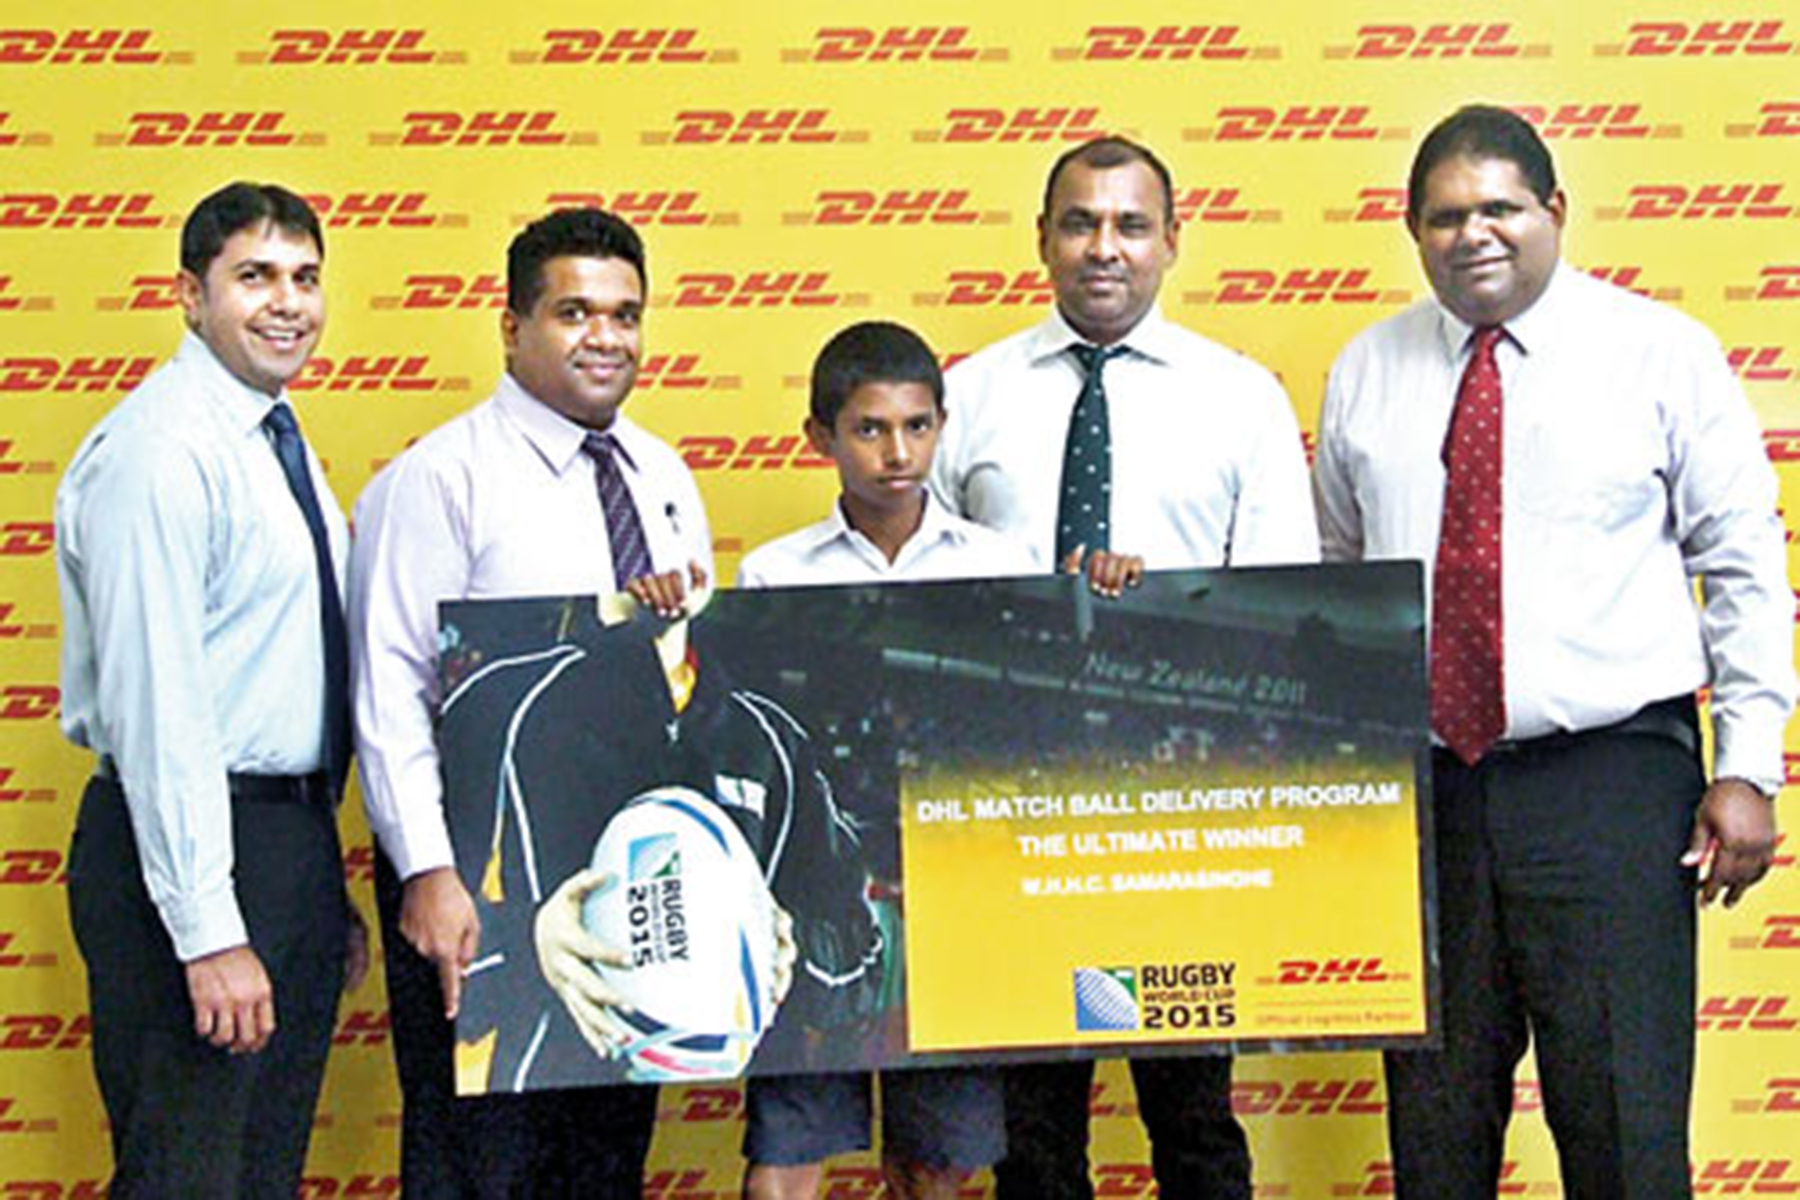 Sri Lankan Student To Deliver Match Ball At Rugby World Cup 2015